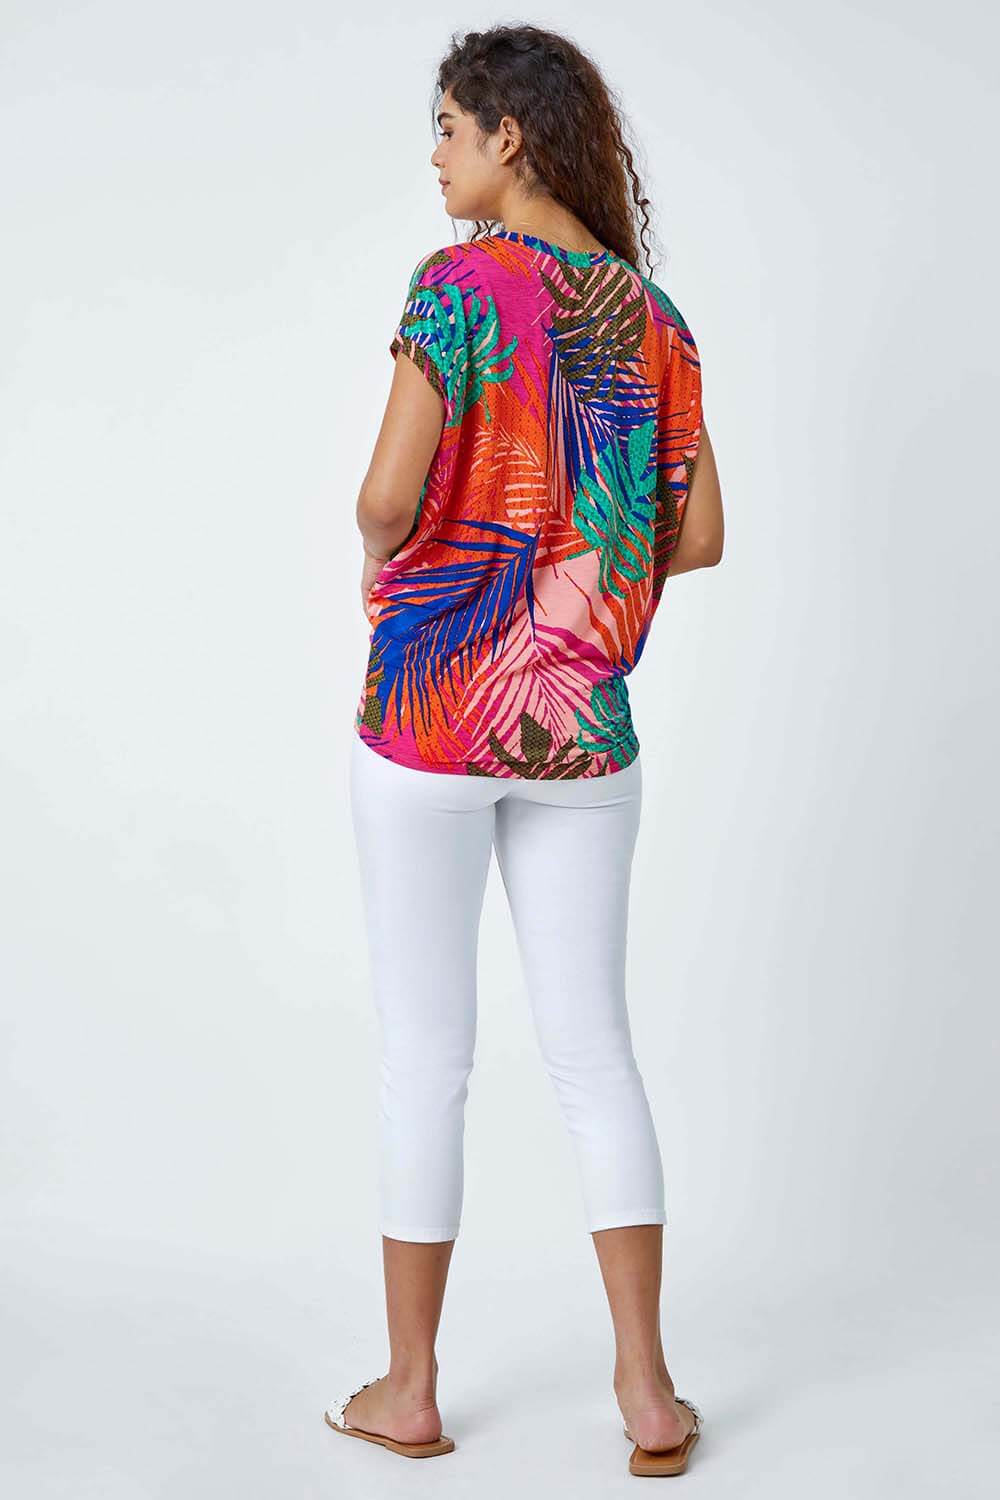 PINK Tropical Print Cocoon Stretch Top, Image 3 of 5